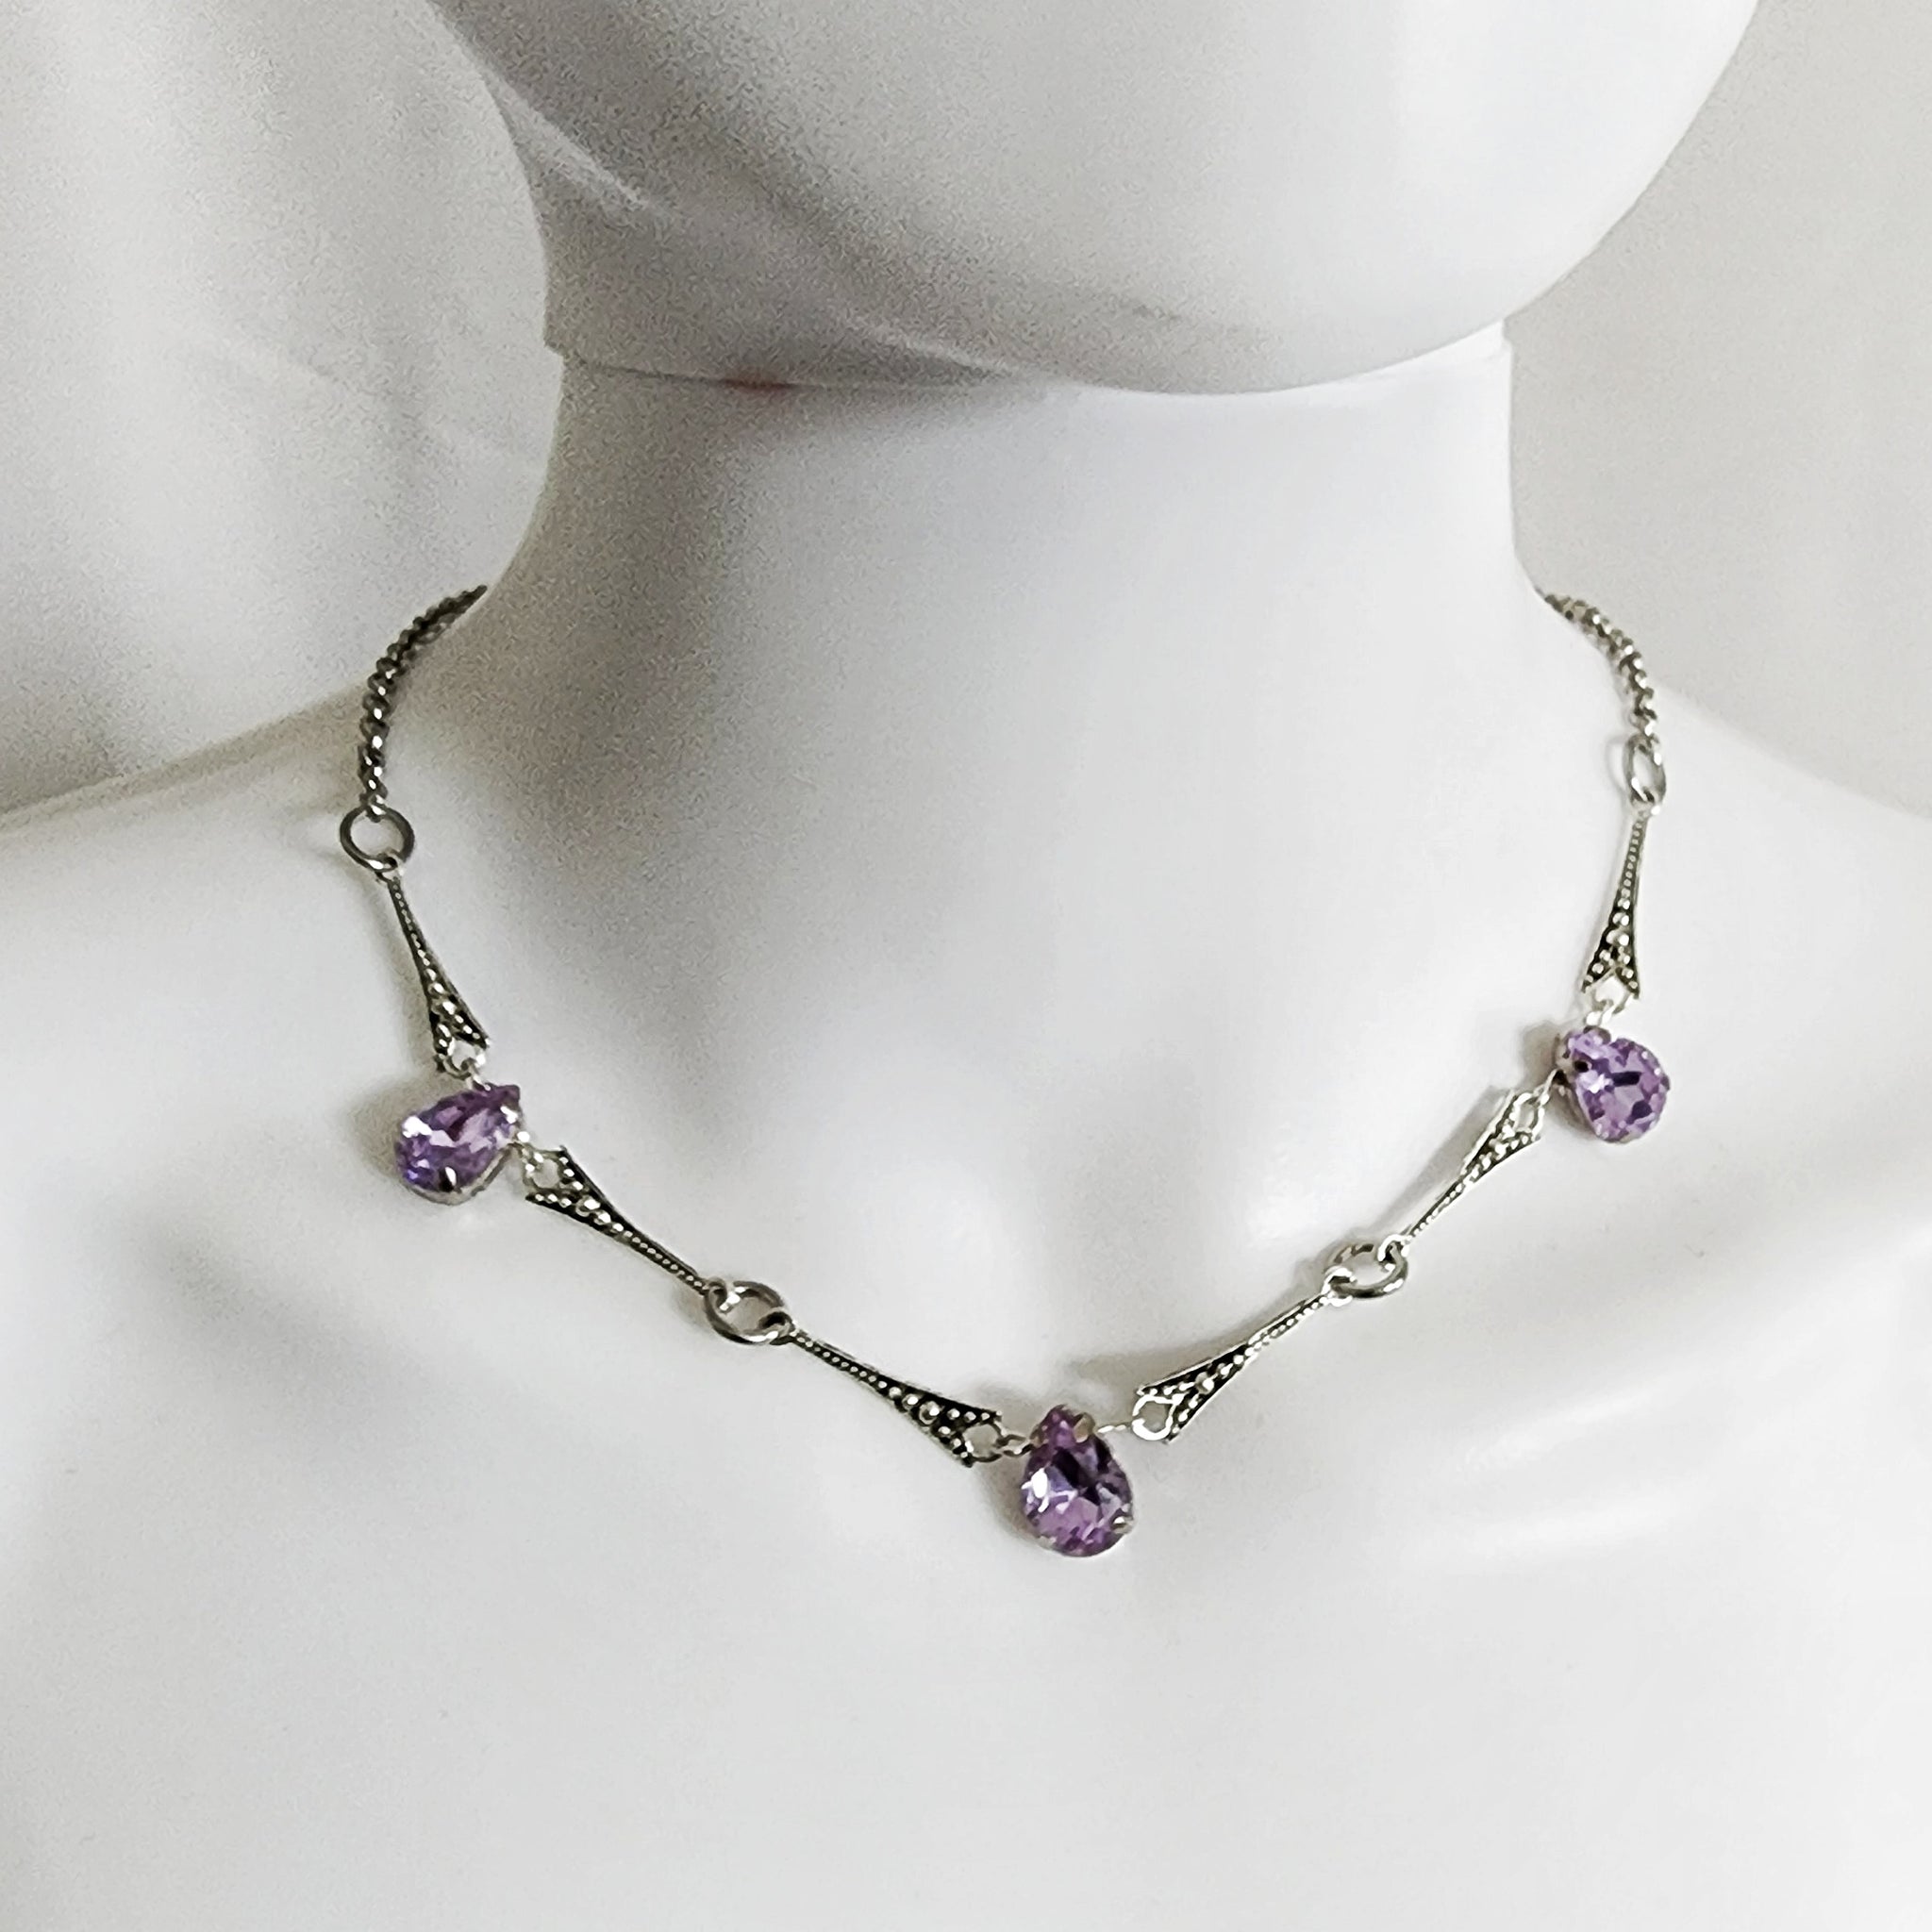 Art Deco Rhinestone Necklace in Purple, Red, or Green